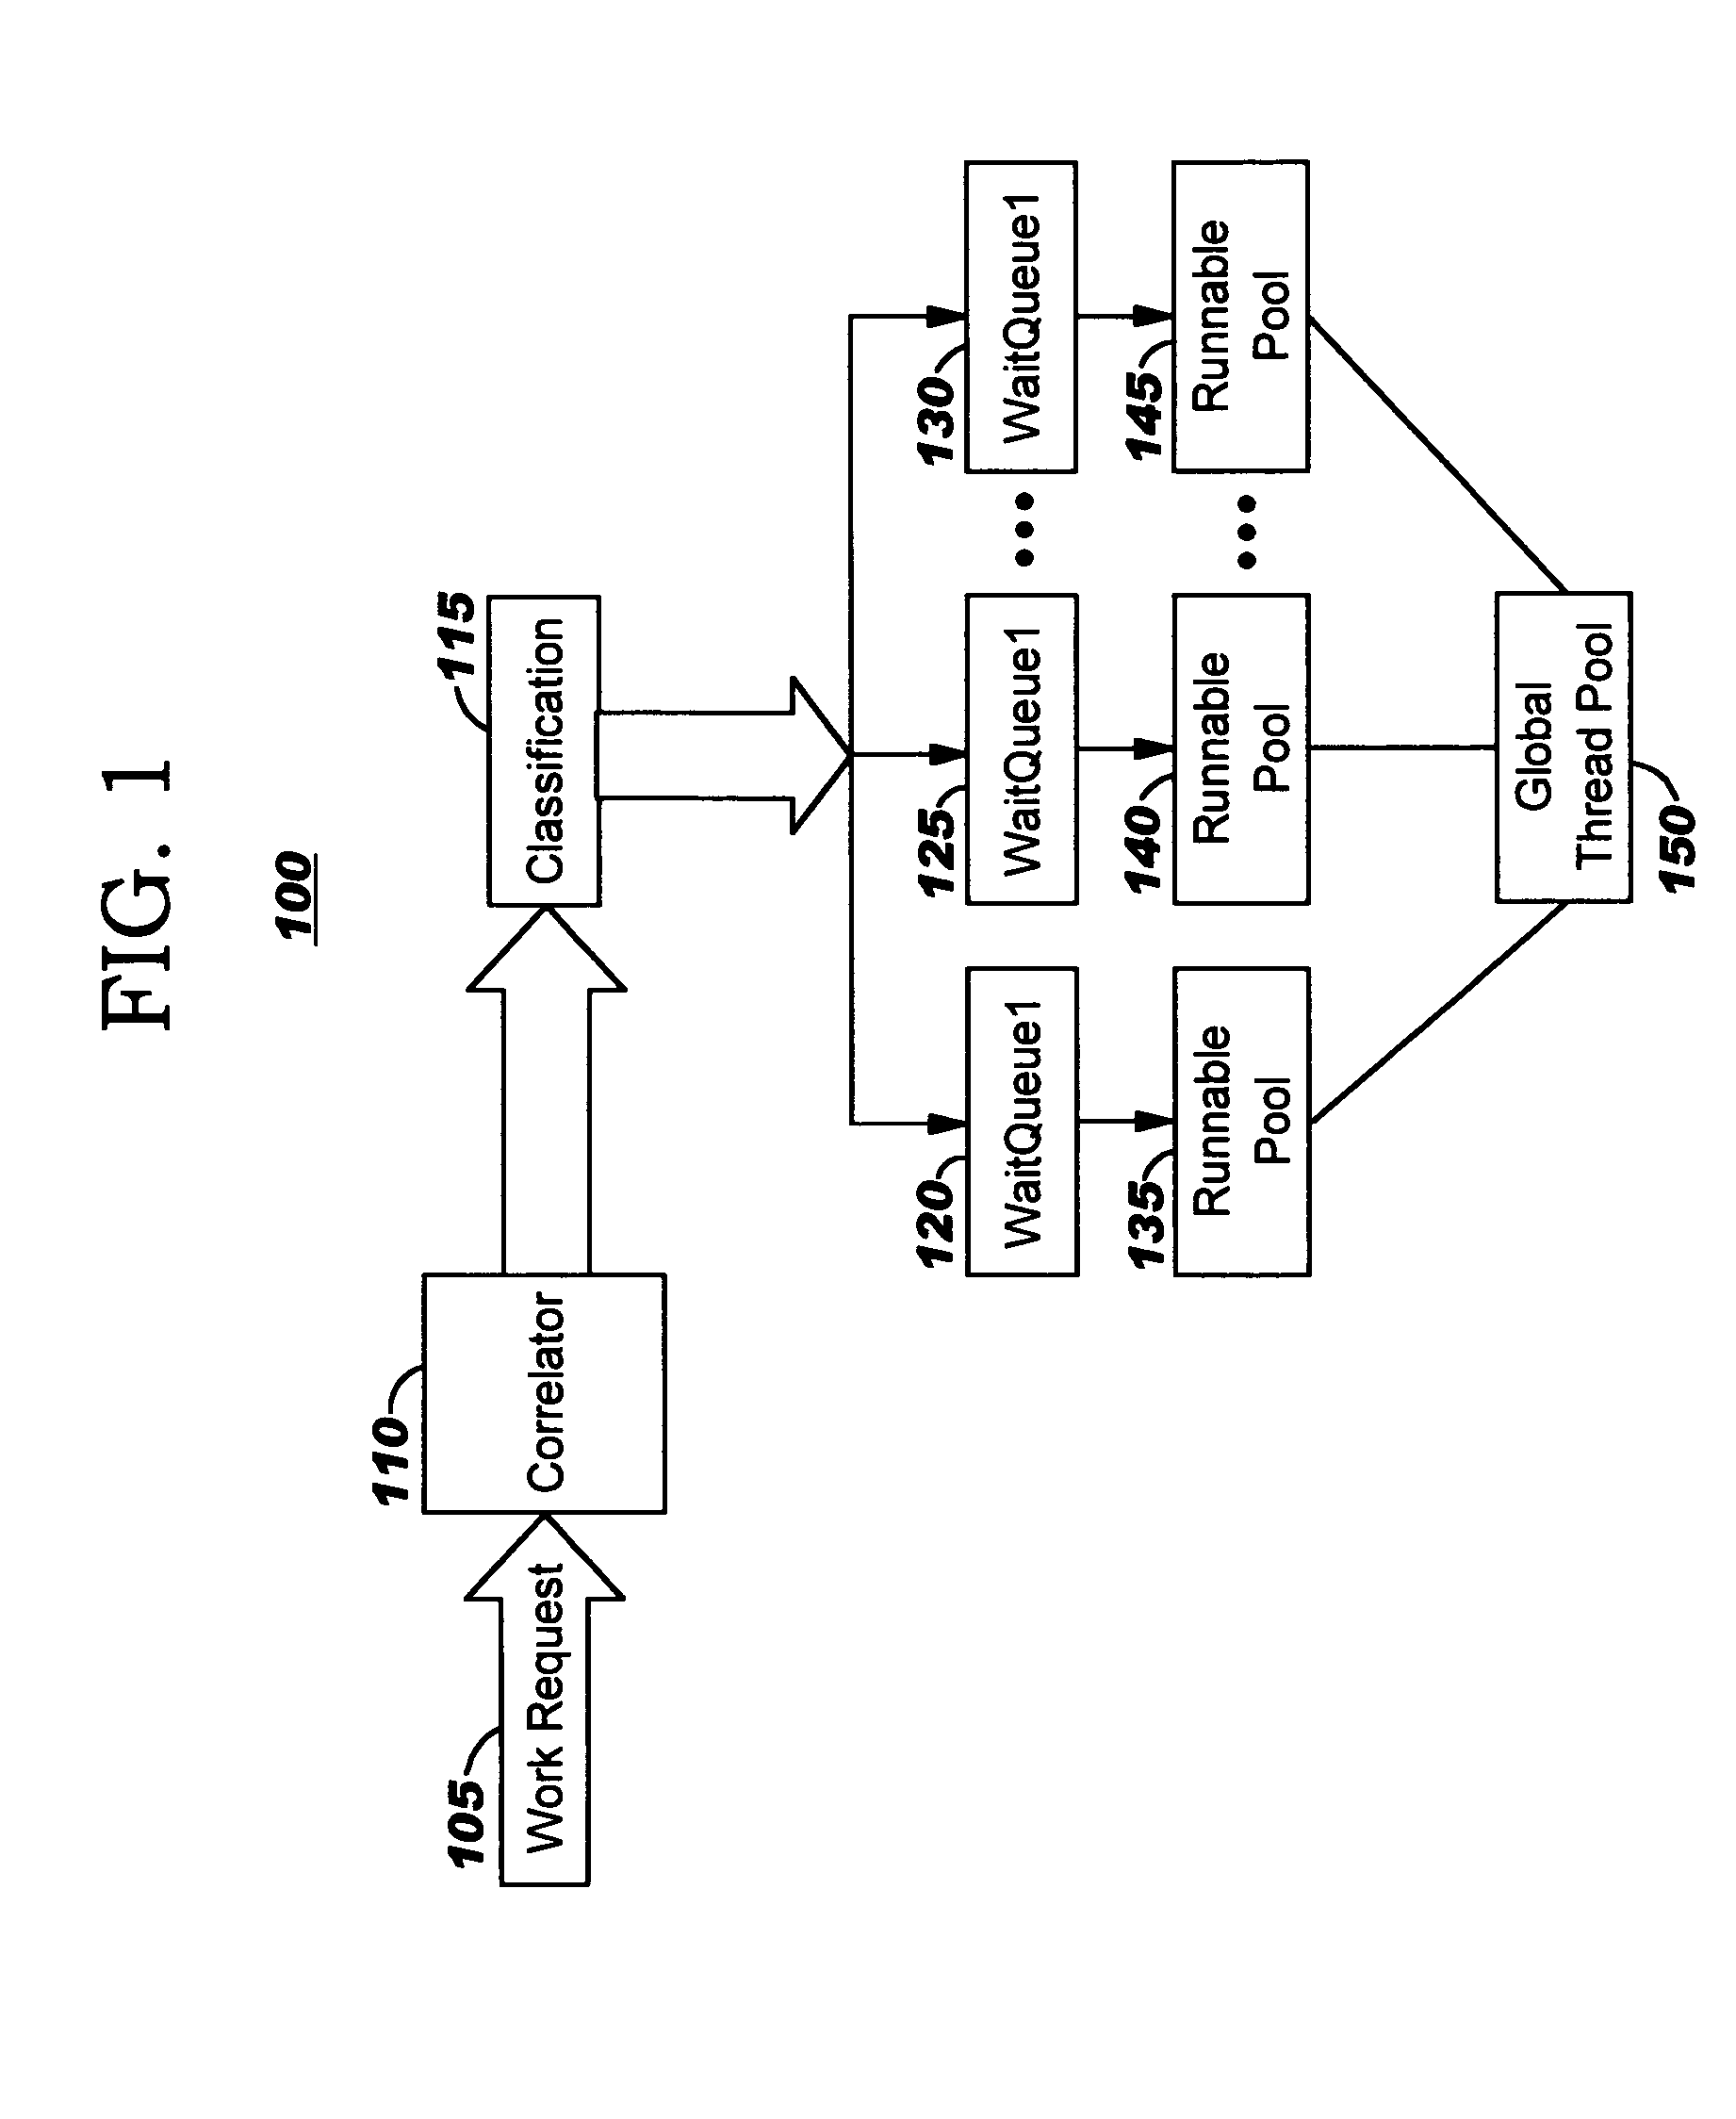 Autonomic workload classification using predictive assertion for wait queue and thread pool selection